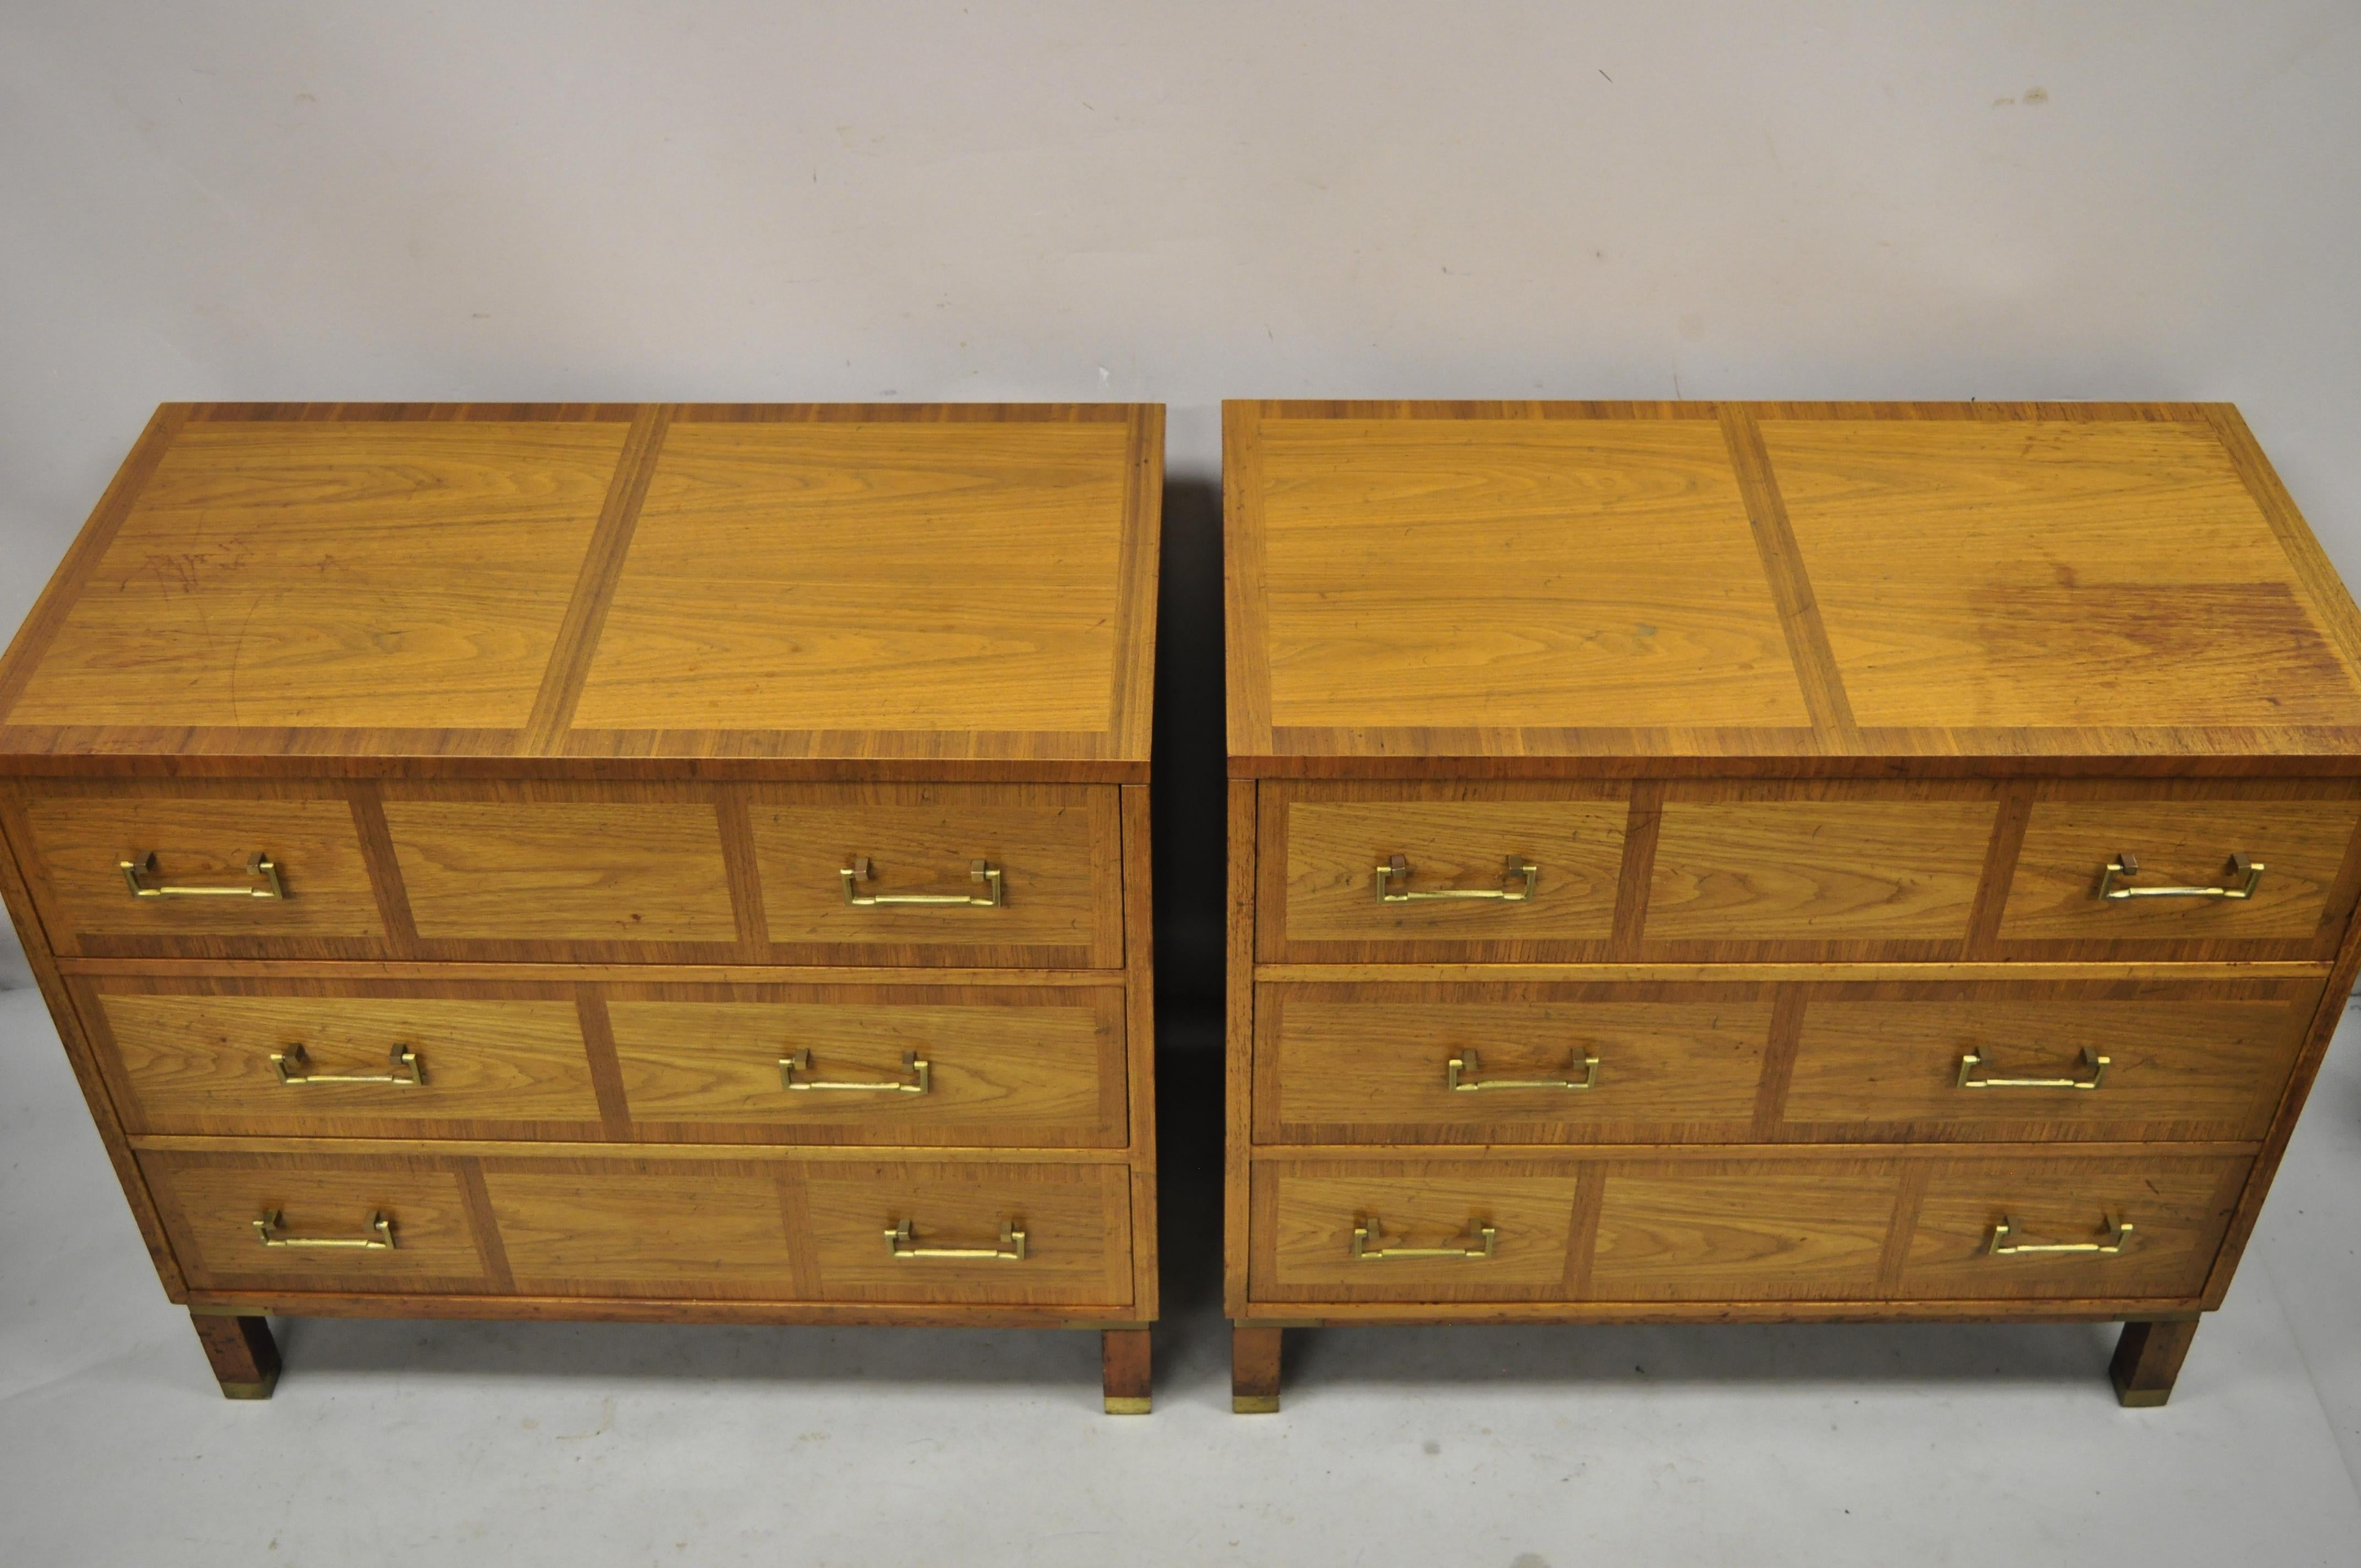 Baker milling road banded walnut brass campaign style bachelor chest dresser - a pair. Item features banded inlay drawer fronts and top, brass capped feet, beautiful wood grain, original stamp, 3 dovetailed drawers, solid brass hardware, quality